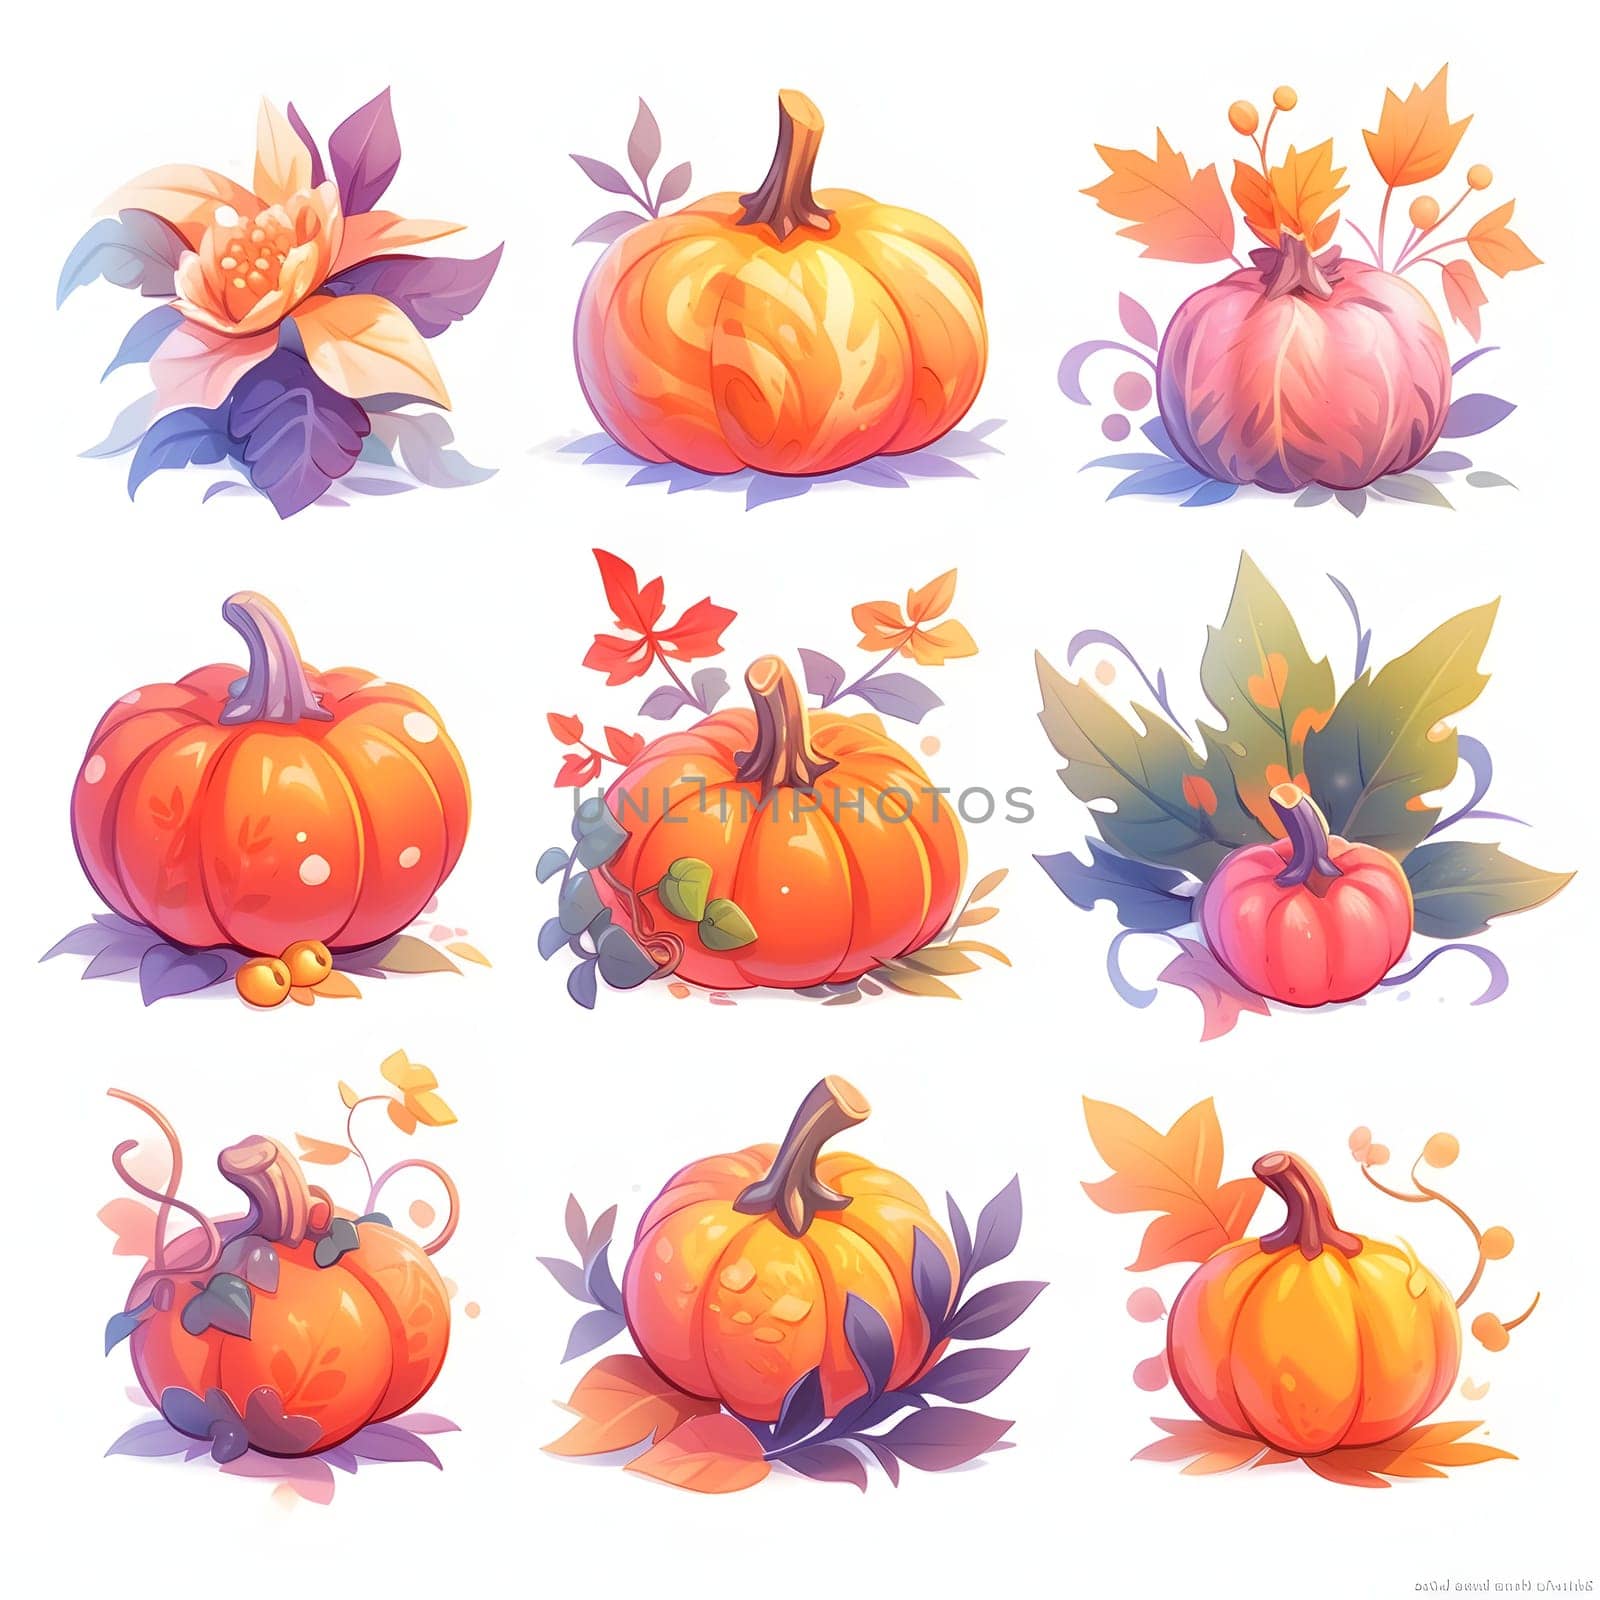 Fairy tale pumpkin illustrations. Pumpkin as a dish of thanksgiving for the harvest, picture on a white isolated background. Atmosphere of joy and celebration.